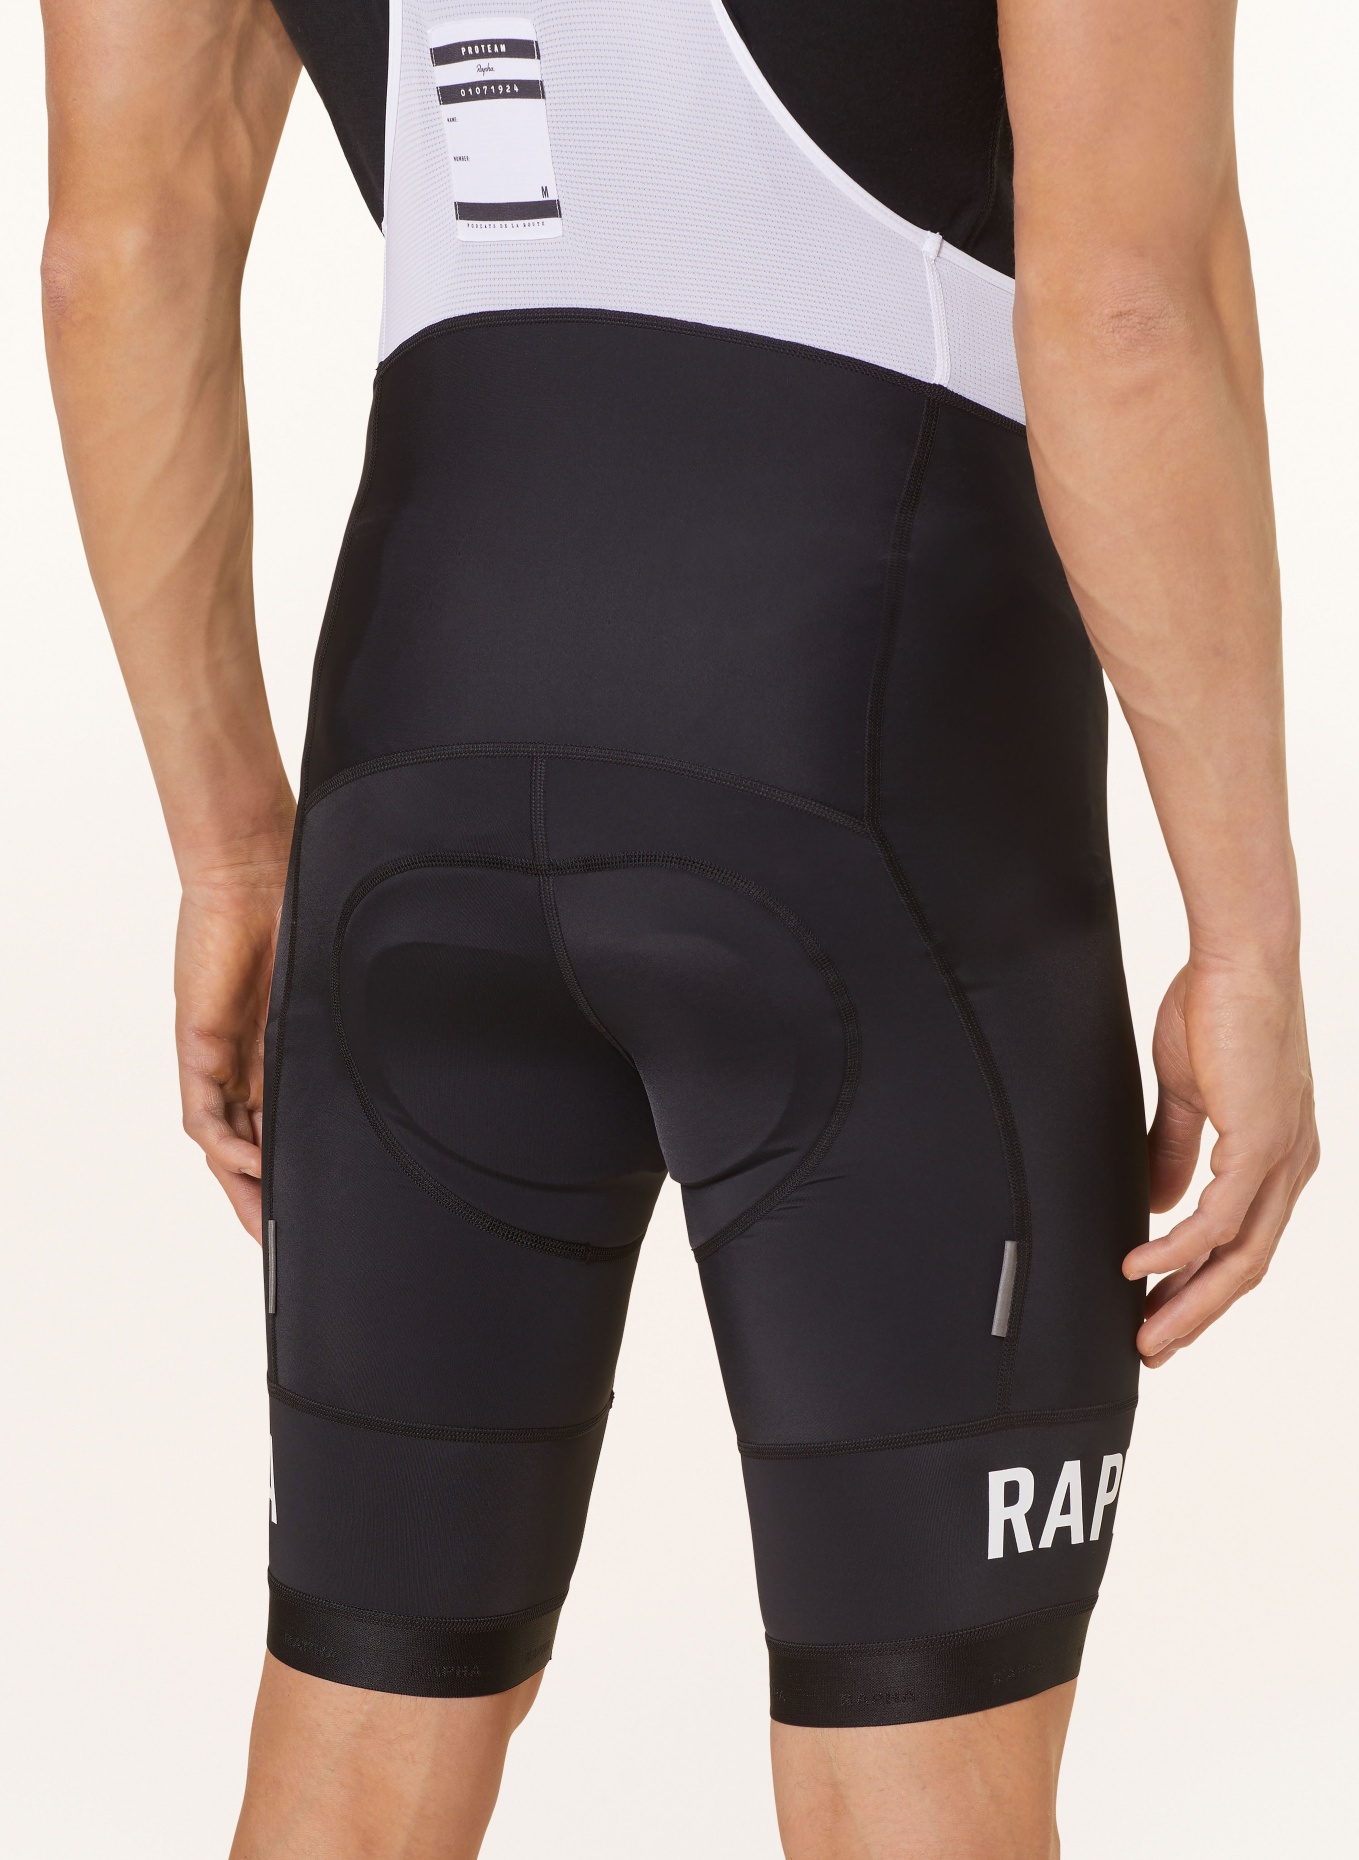 Rapha Cycling shorts PRO TEAM TRAINING BIB with straps and padded insert, Color: BLACK/ WHITE (Image 6)